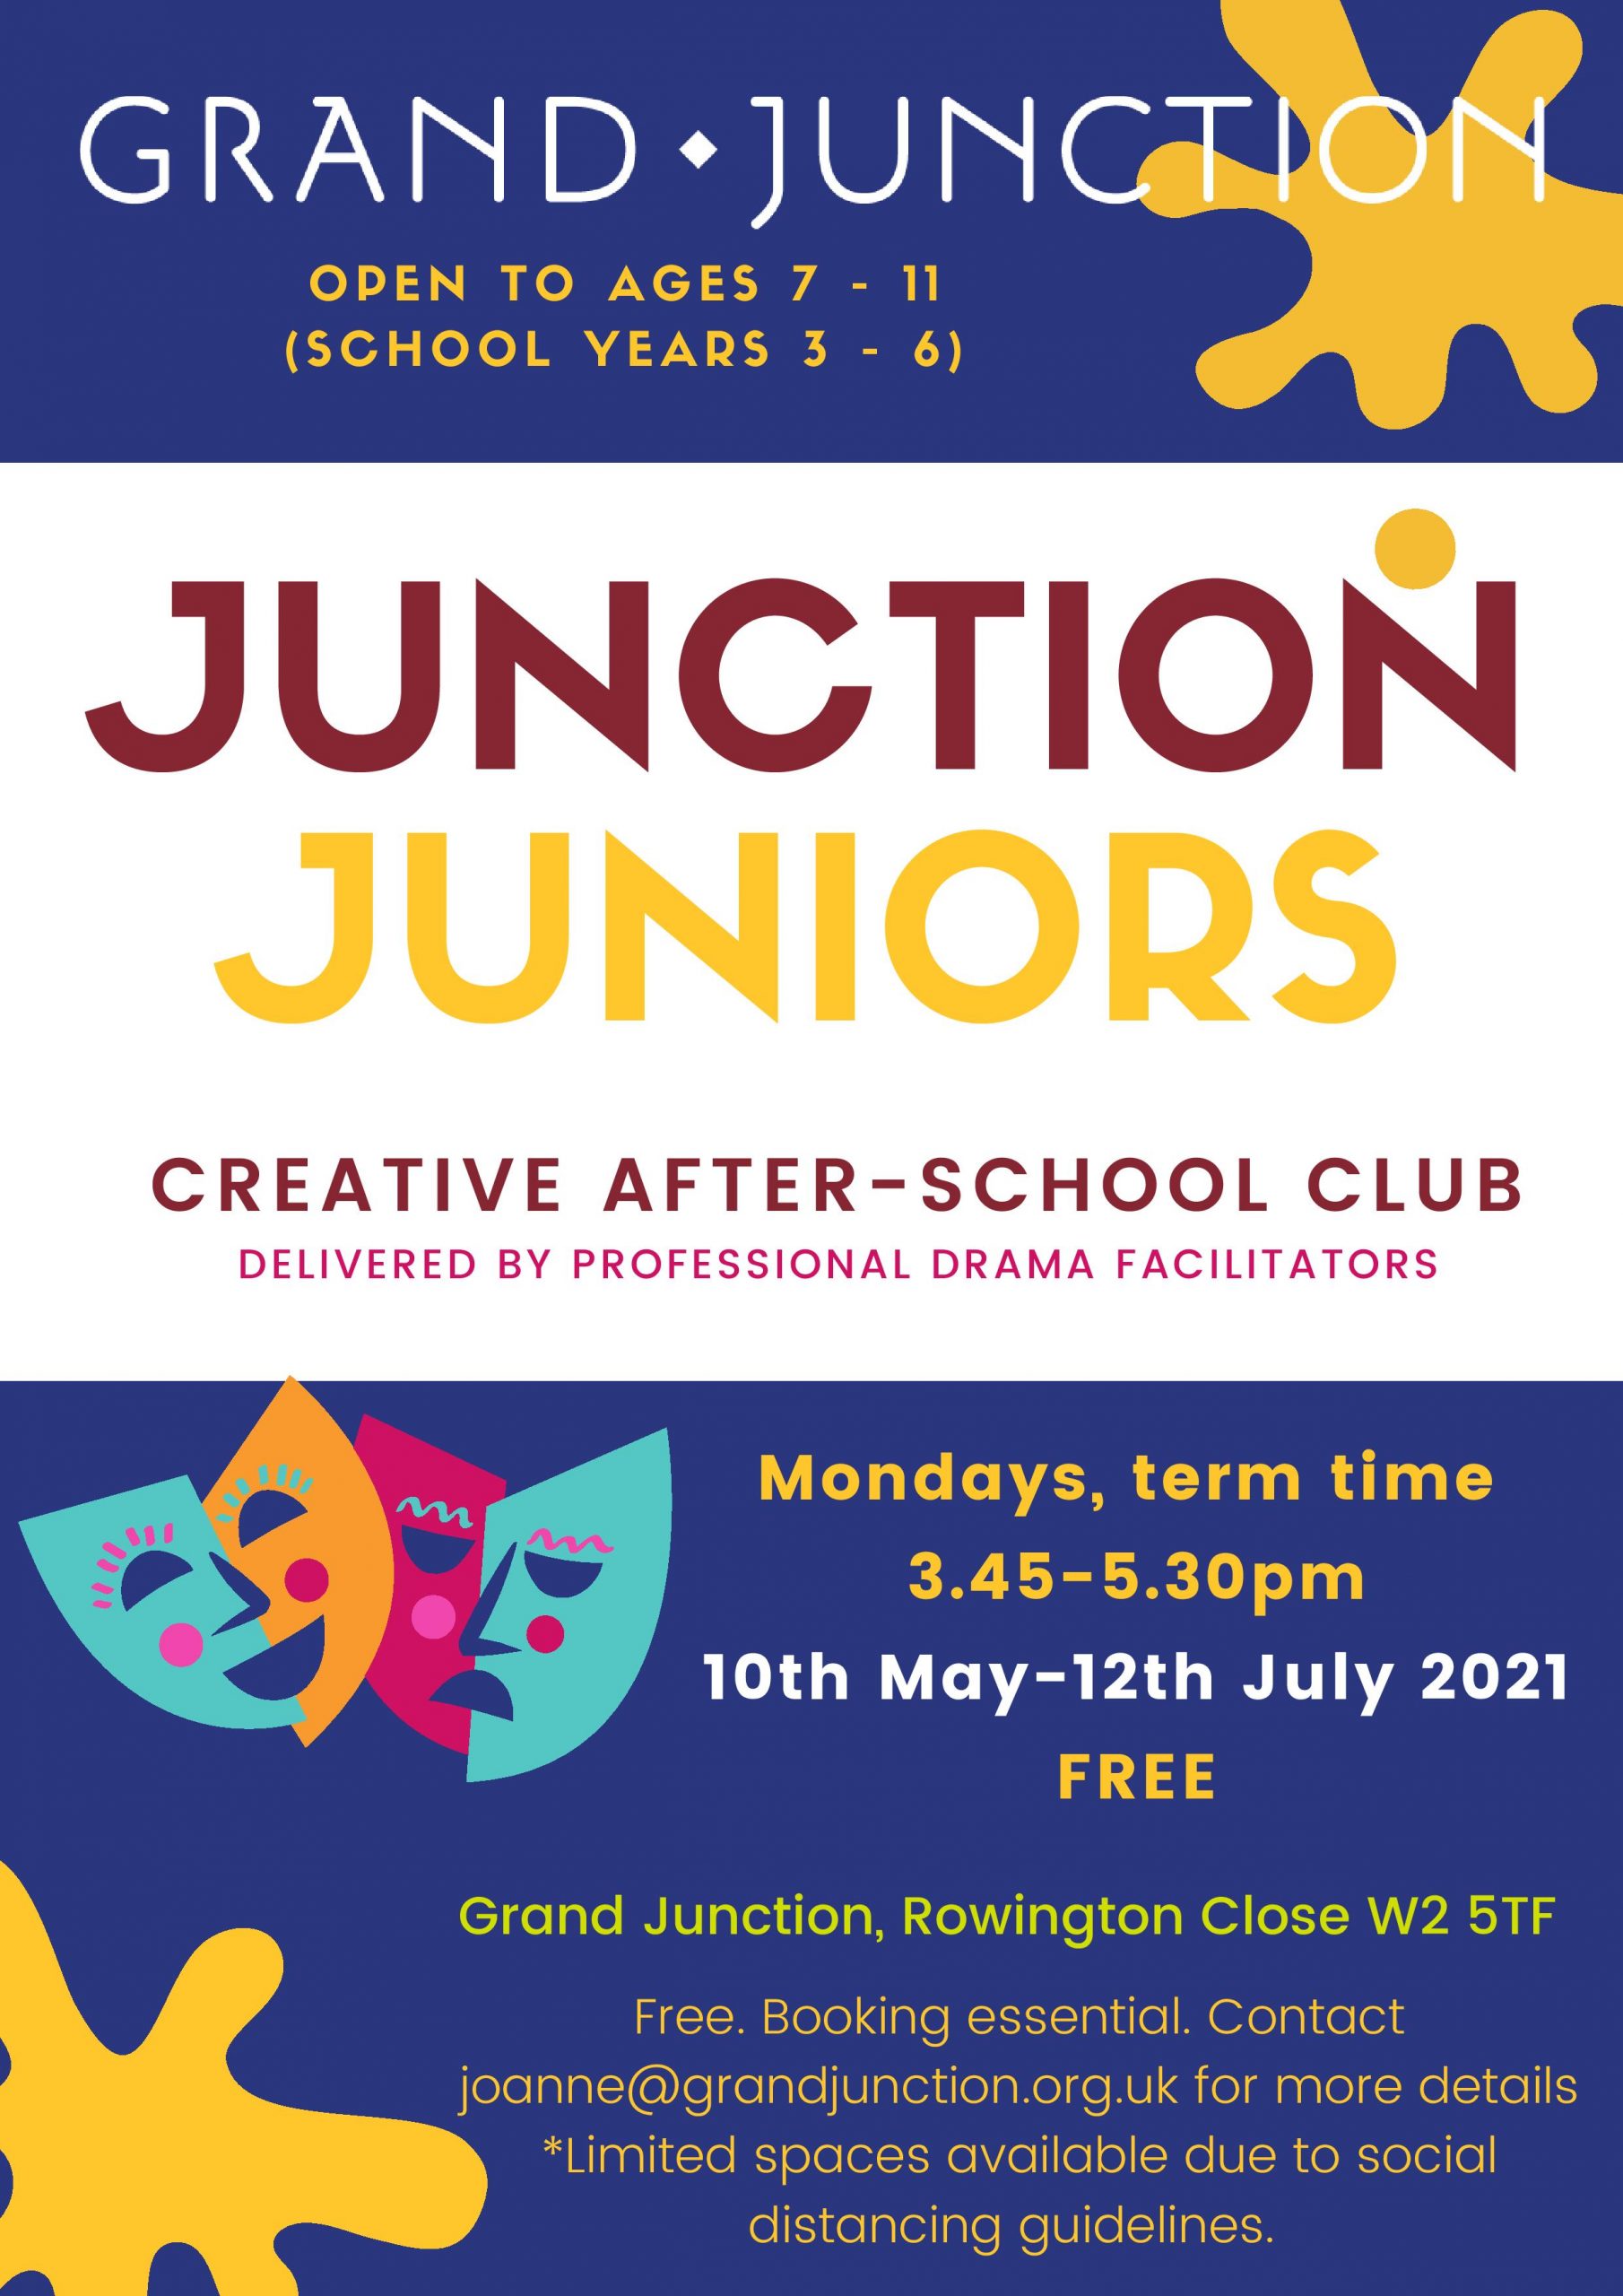 JUNCTION JUNIORS - Creative after-school club delivered by professional drama facilitators